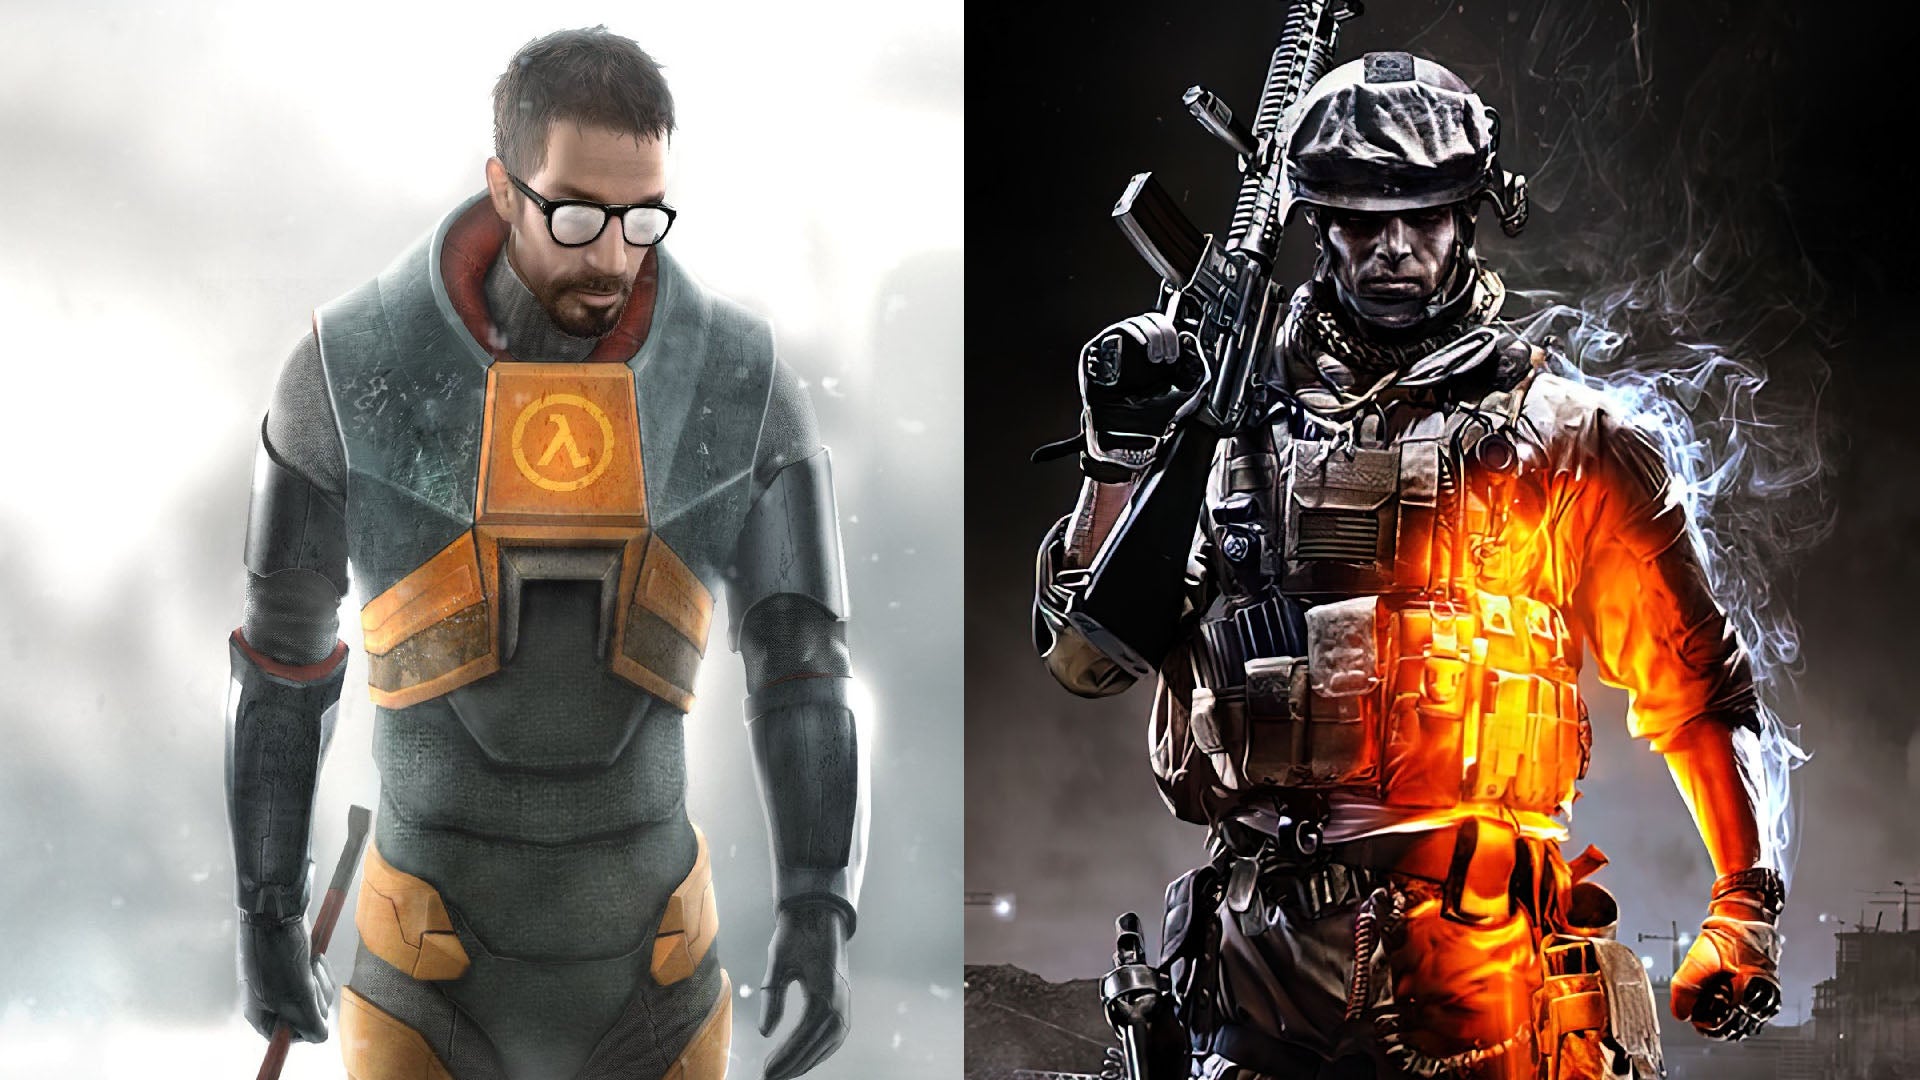 DF Retro Time Capsule: revisiting Half-Life 2 and Battlefield 3 on classic PC hardware